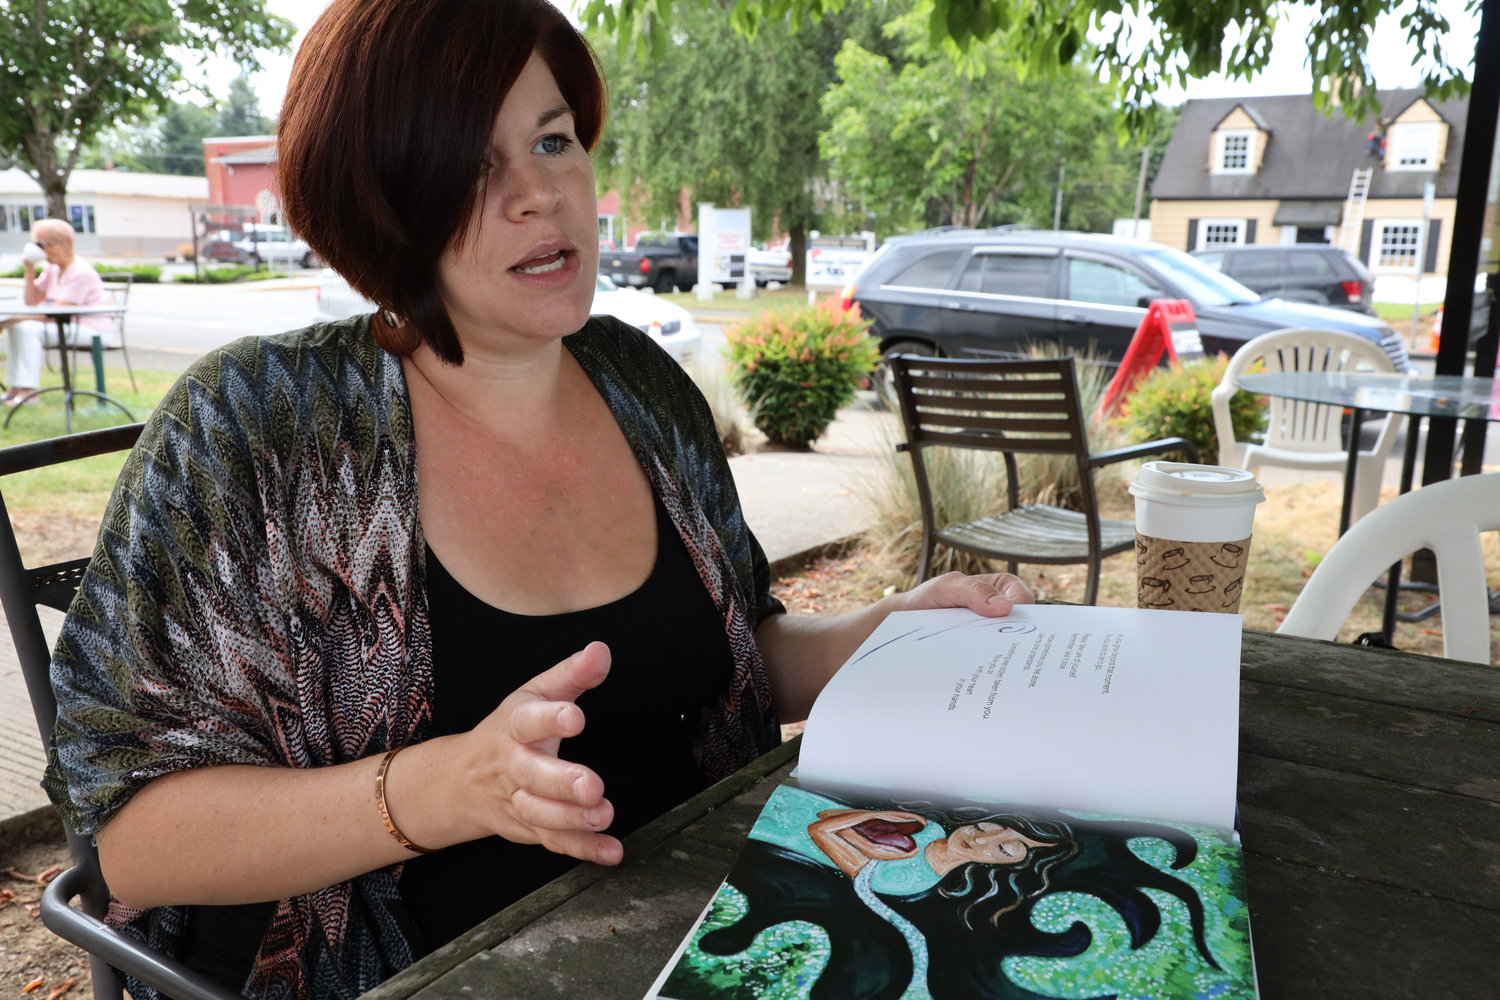 Megan Hindi speaks about her book with The Reflector Newspaper while at Old Town Battle Grounds July 18.